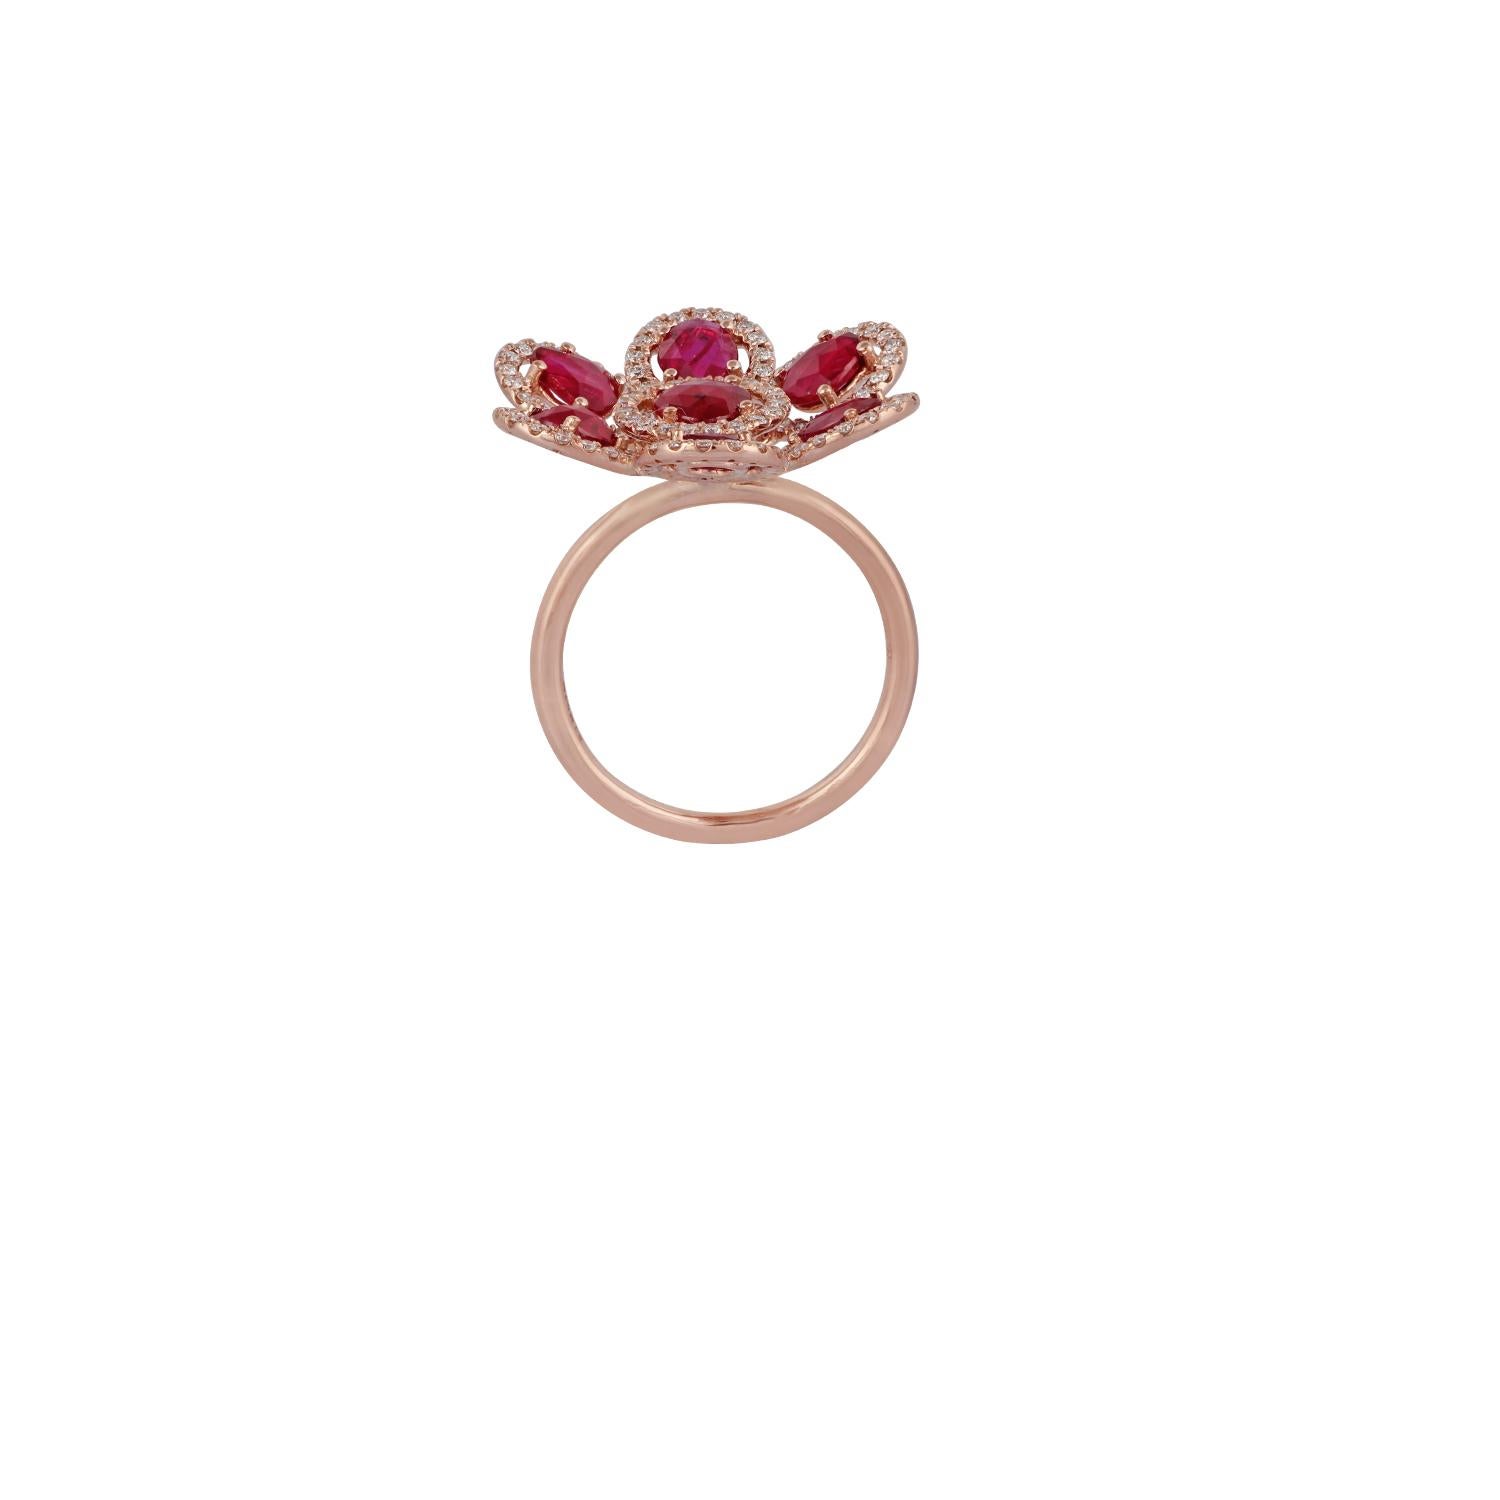 It's an Elegant Ruby & Diamond Ring features 7 rose cut rubies weight 2.38 carats with 123 round brilliant cut diamonds weight 0.64 carats, the entire ring is studded in 18K rose gold weight 4.95 grams, this is a gorgeous cocktail-style ring.